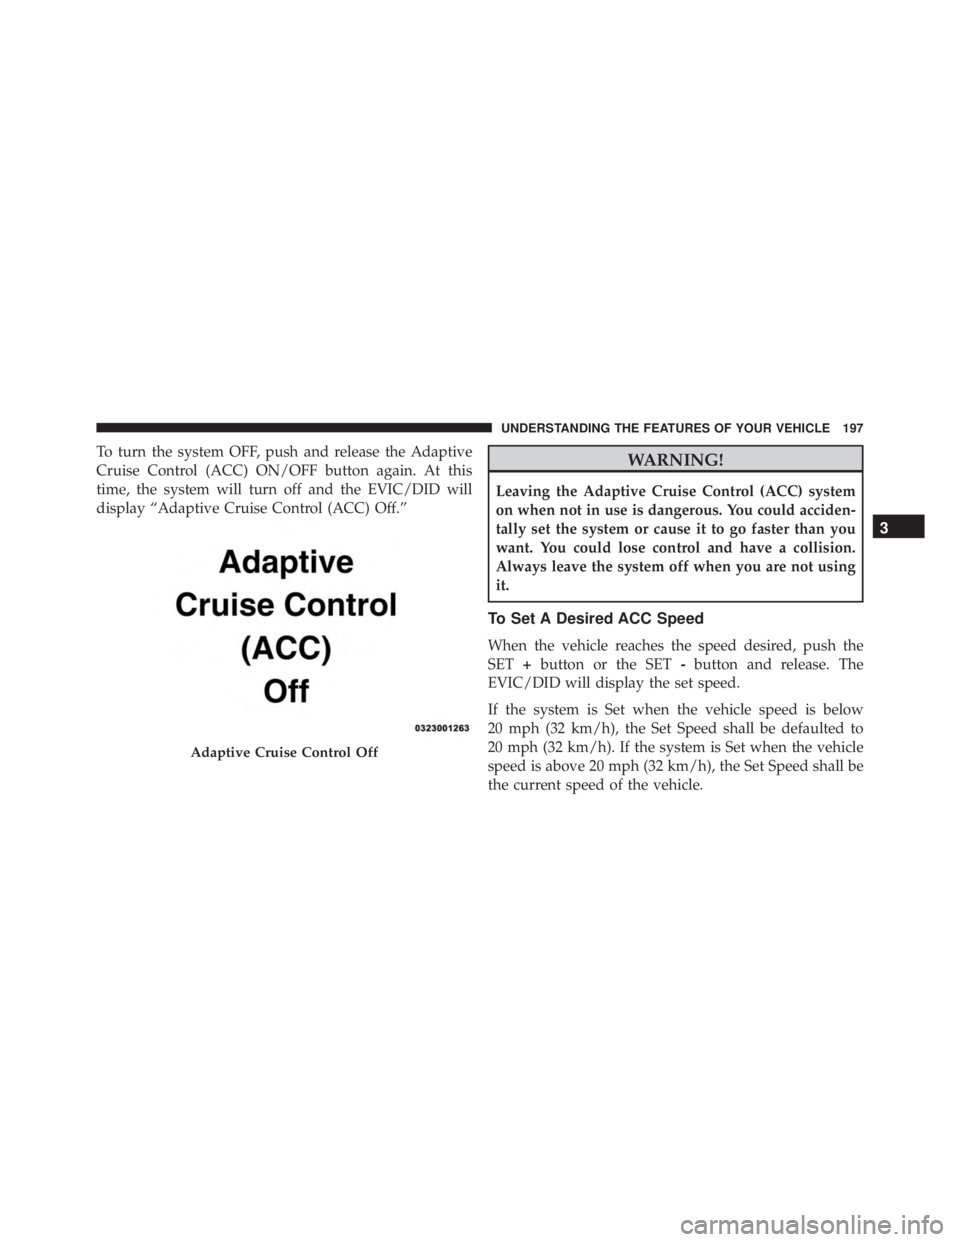 JEEP CHEROKEE TRAILHAWK 2016  Owners Manual To turn the system OFF, push and release the Adaptive
Cruise Control (ACC) ON/OFF button again. At this
time, the system will turn off and the EVIC/DID will
display “Adaptive Cruise Control (ACC) Of